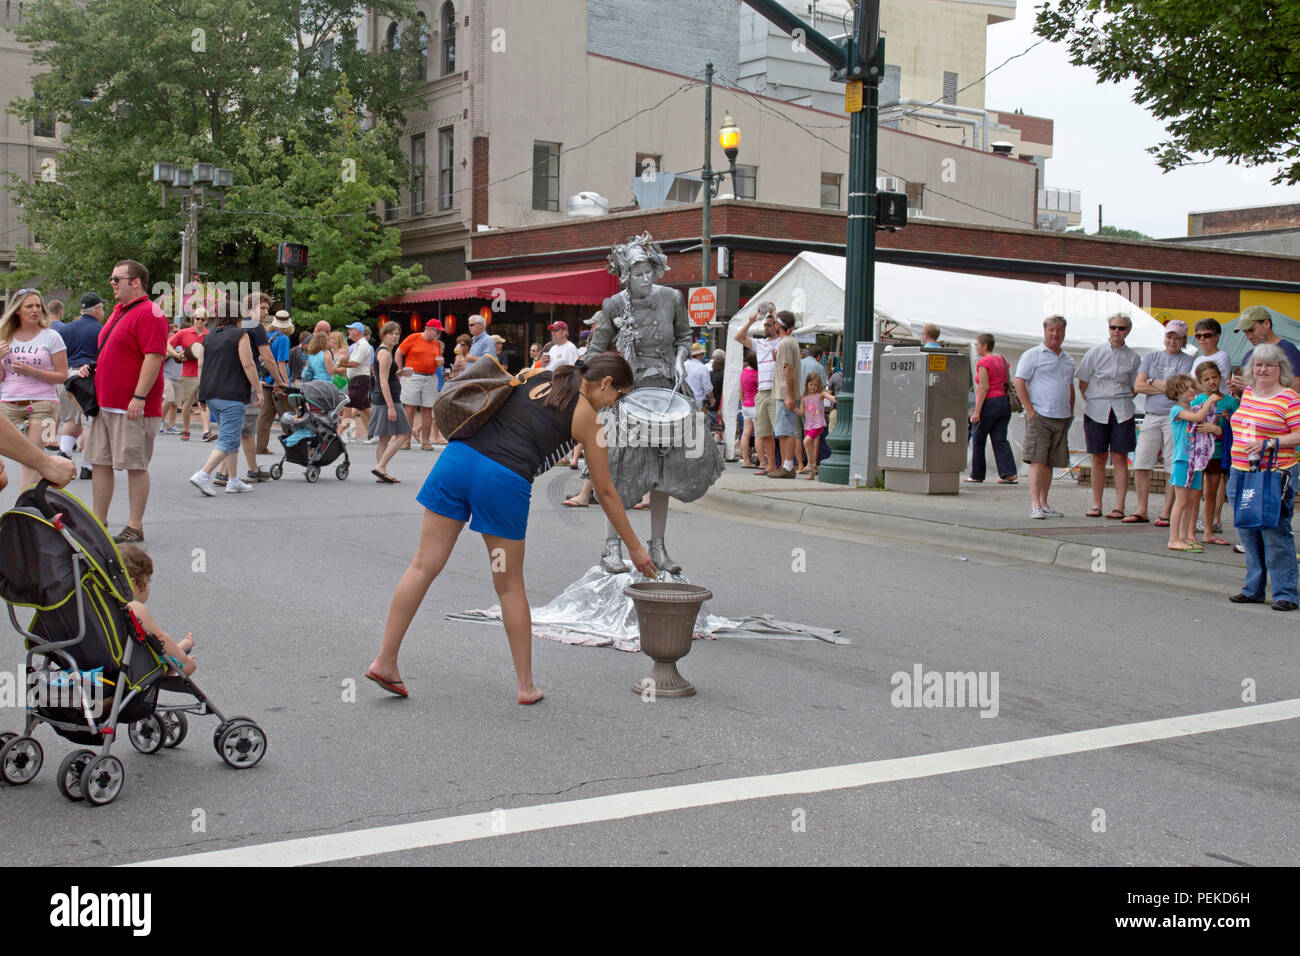 ASHEVILLE, NC, USA - JULY 27, 2013: A woman tips a living statue performer depicting an old fashioned, drummer at the last bele Chere Festival in 2013 Stock Photo